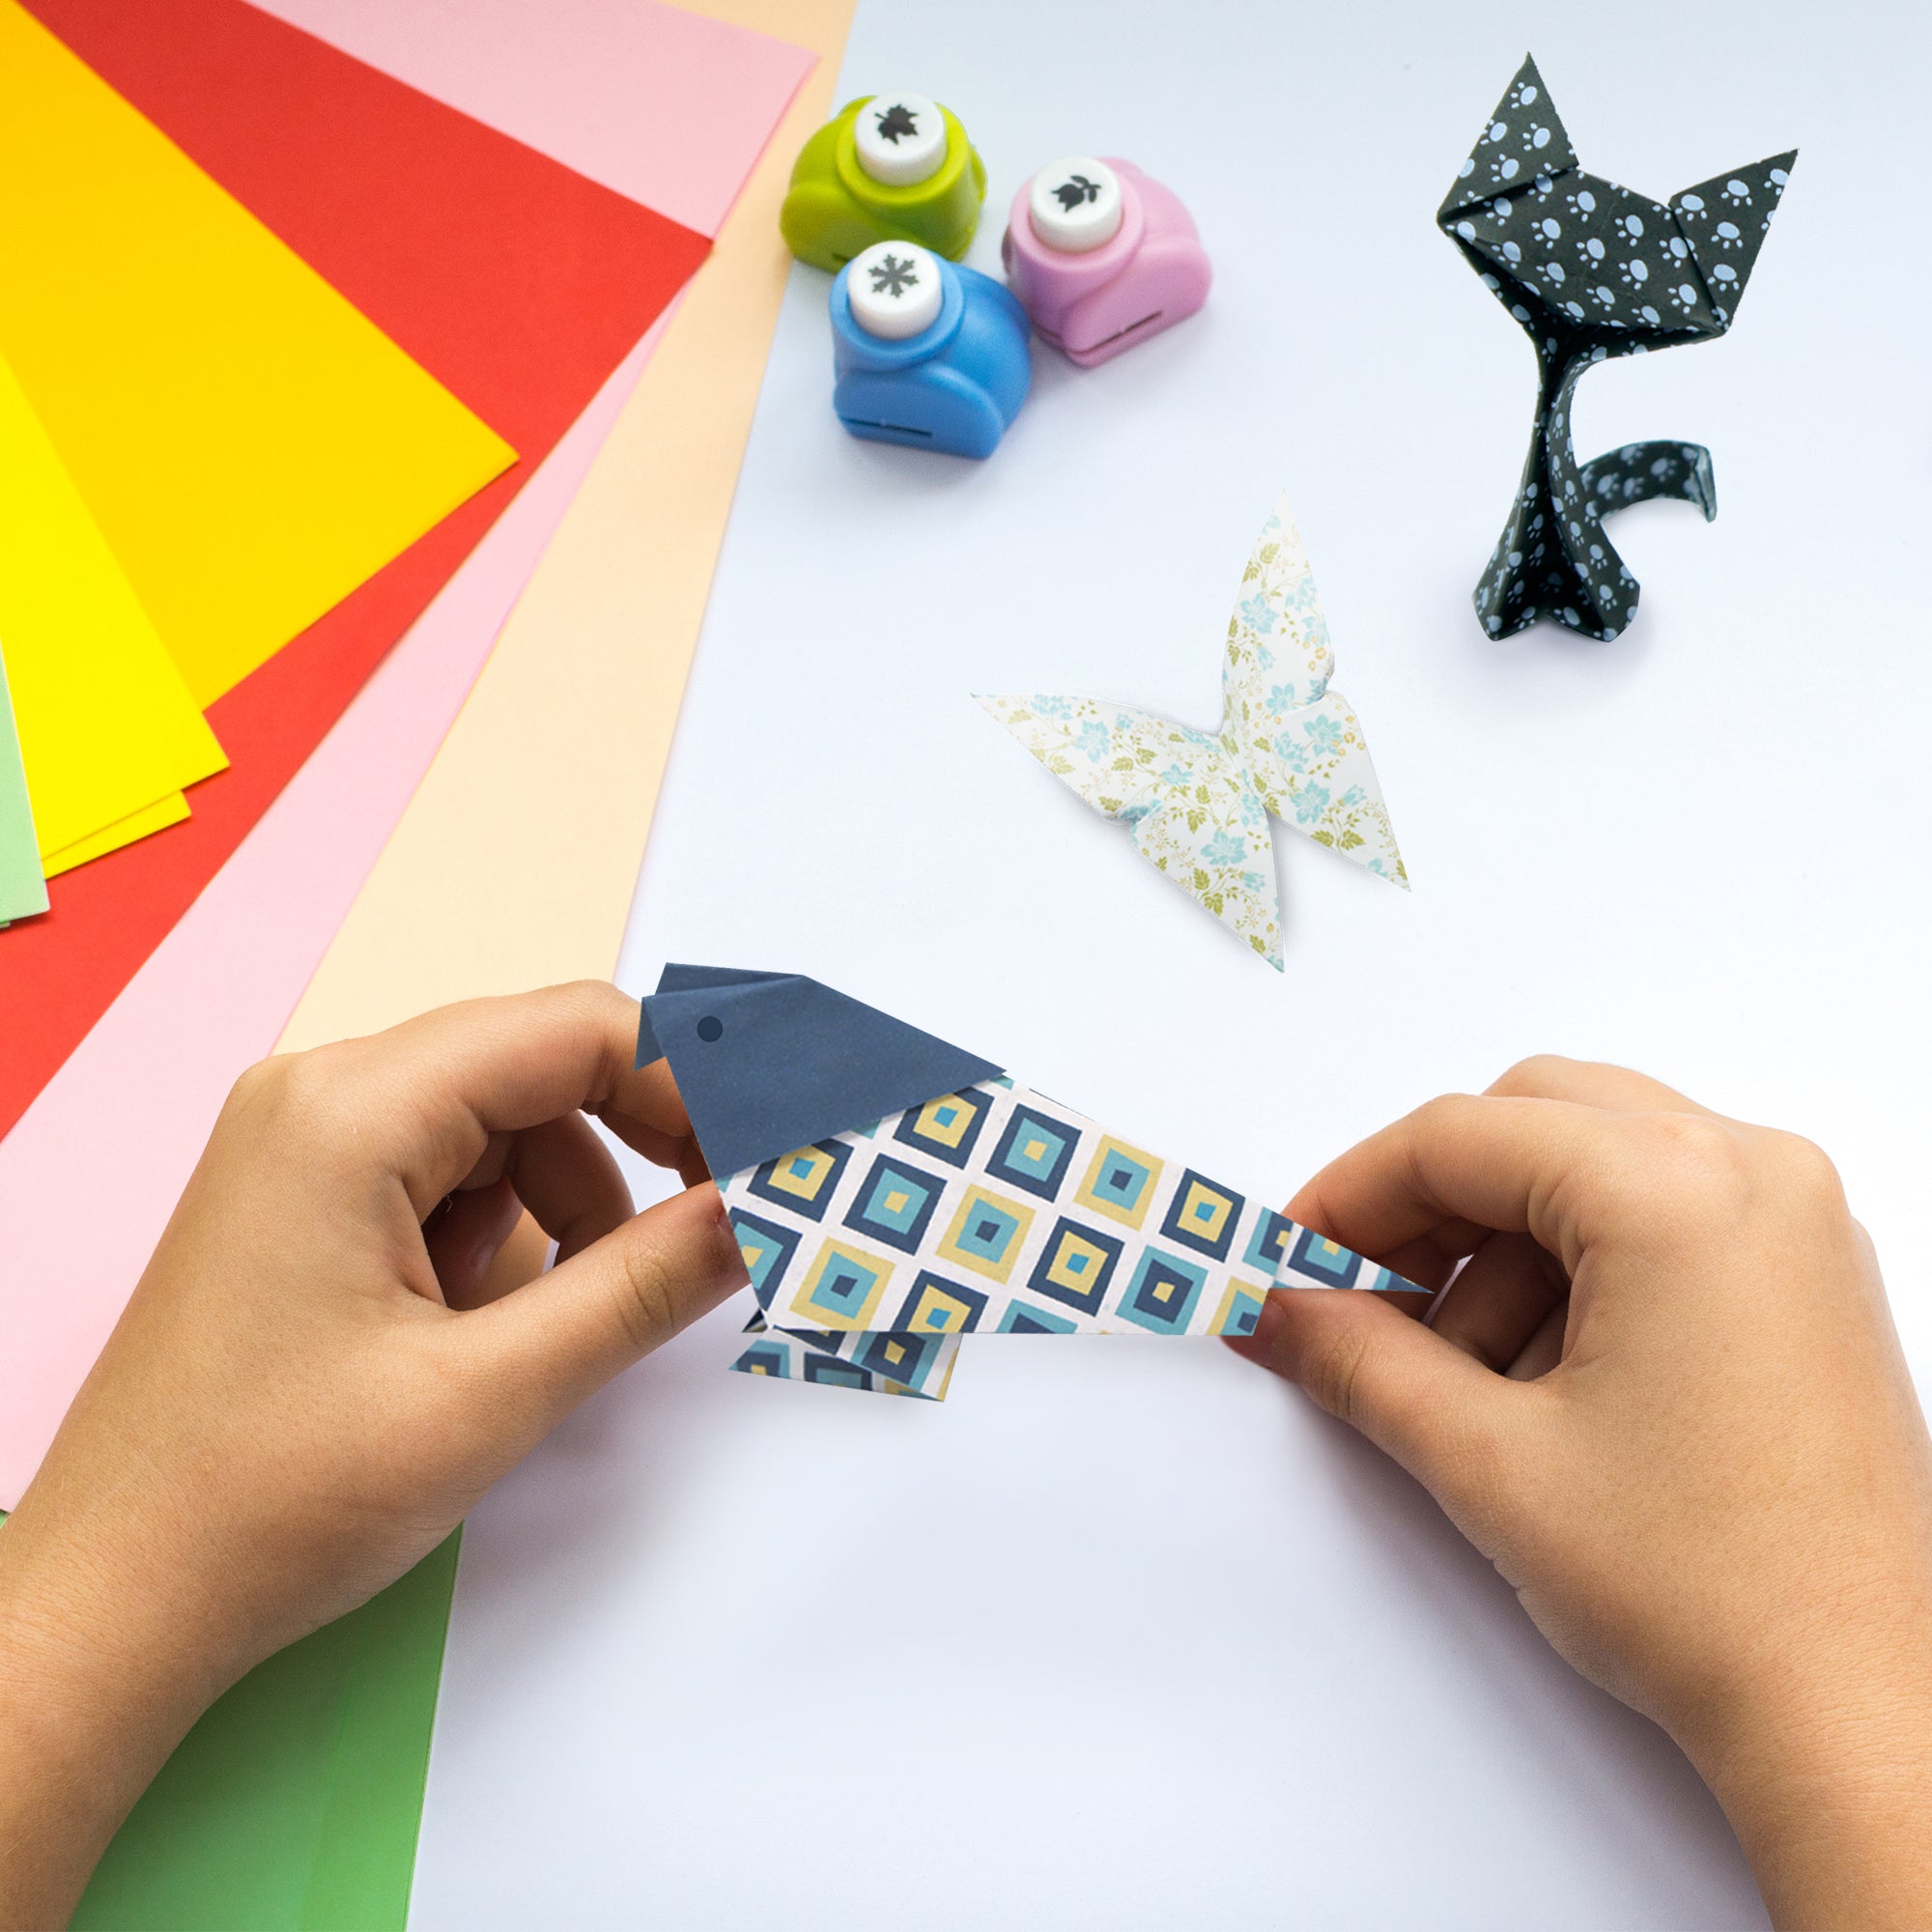 10 pack] Activating Origami Paper Set